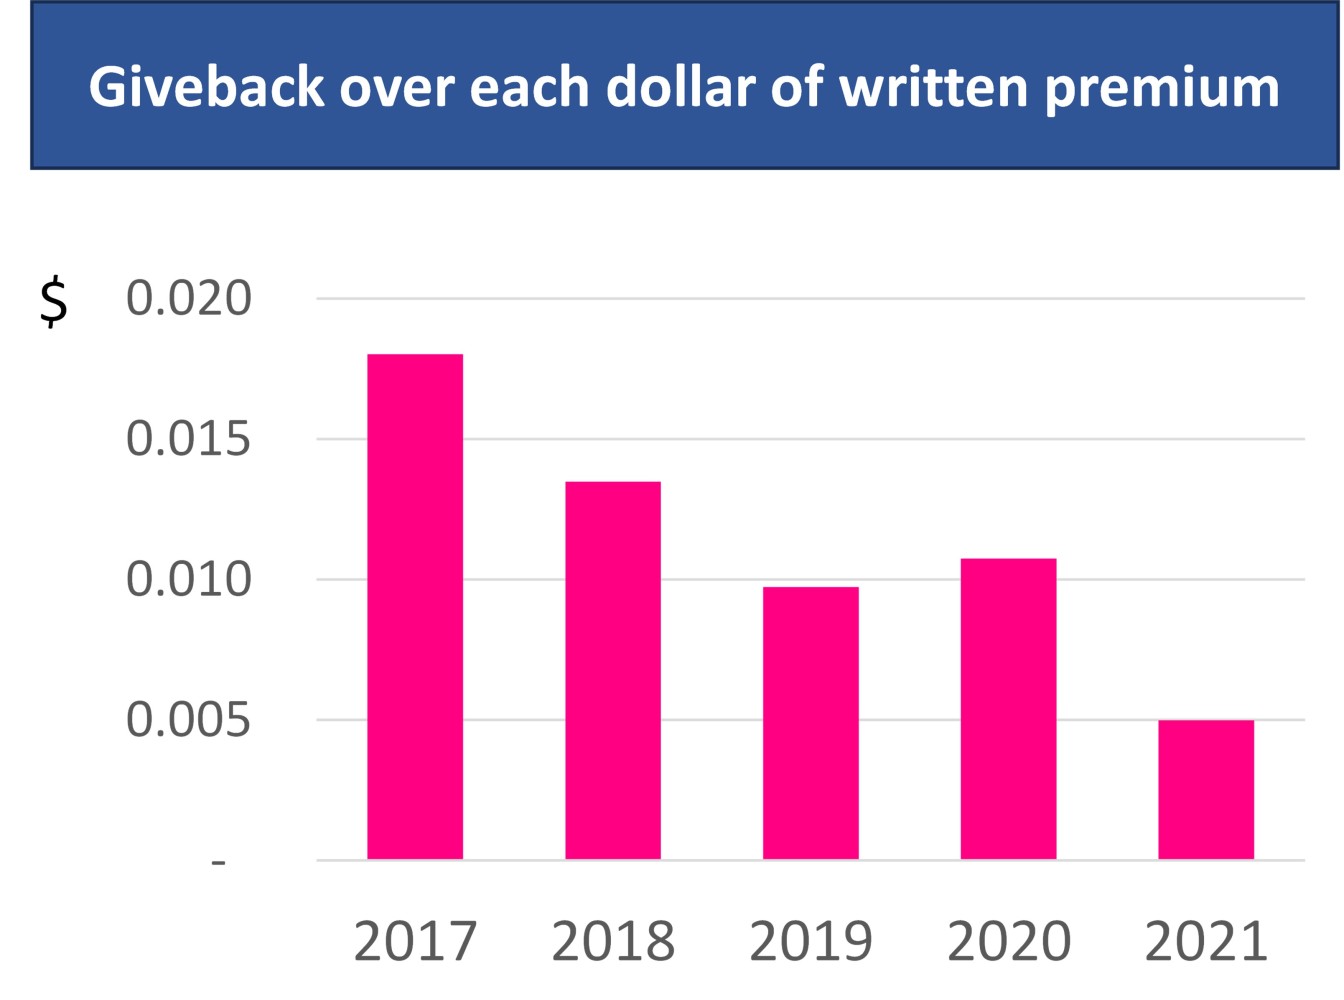 Chart showing giveback over each dollar of written premiums from 2017 to 2021